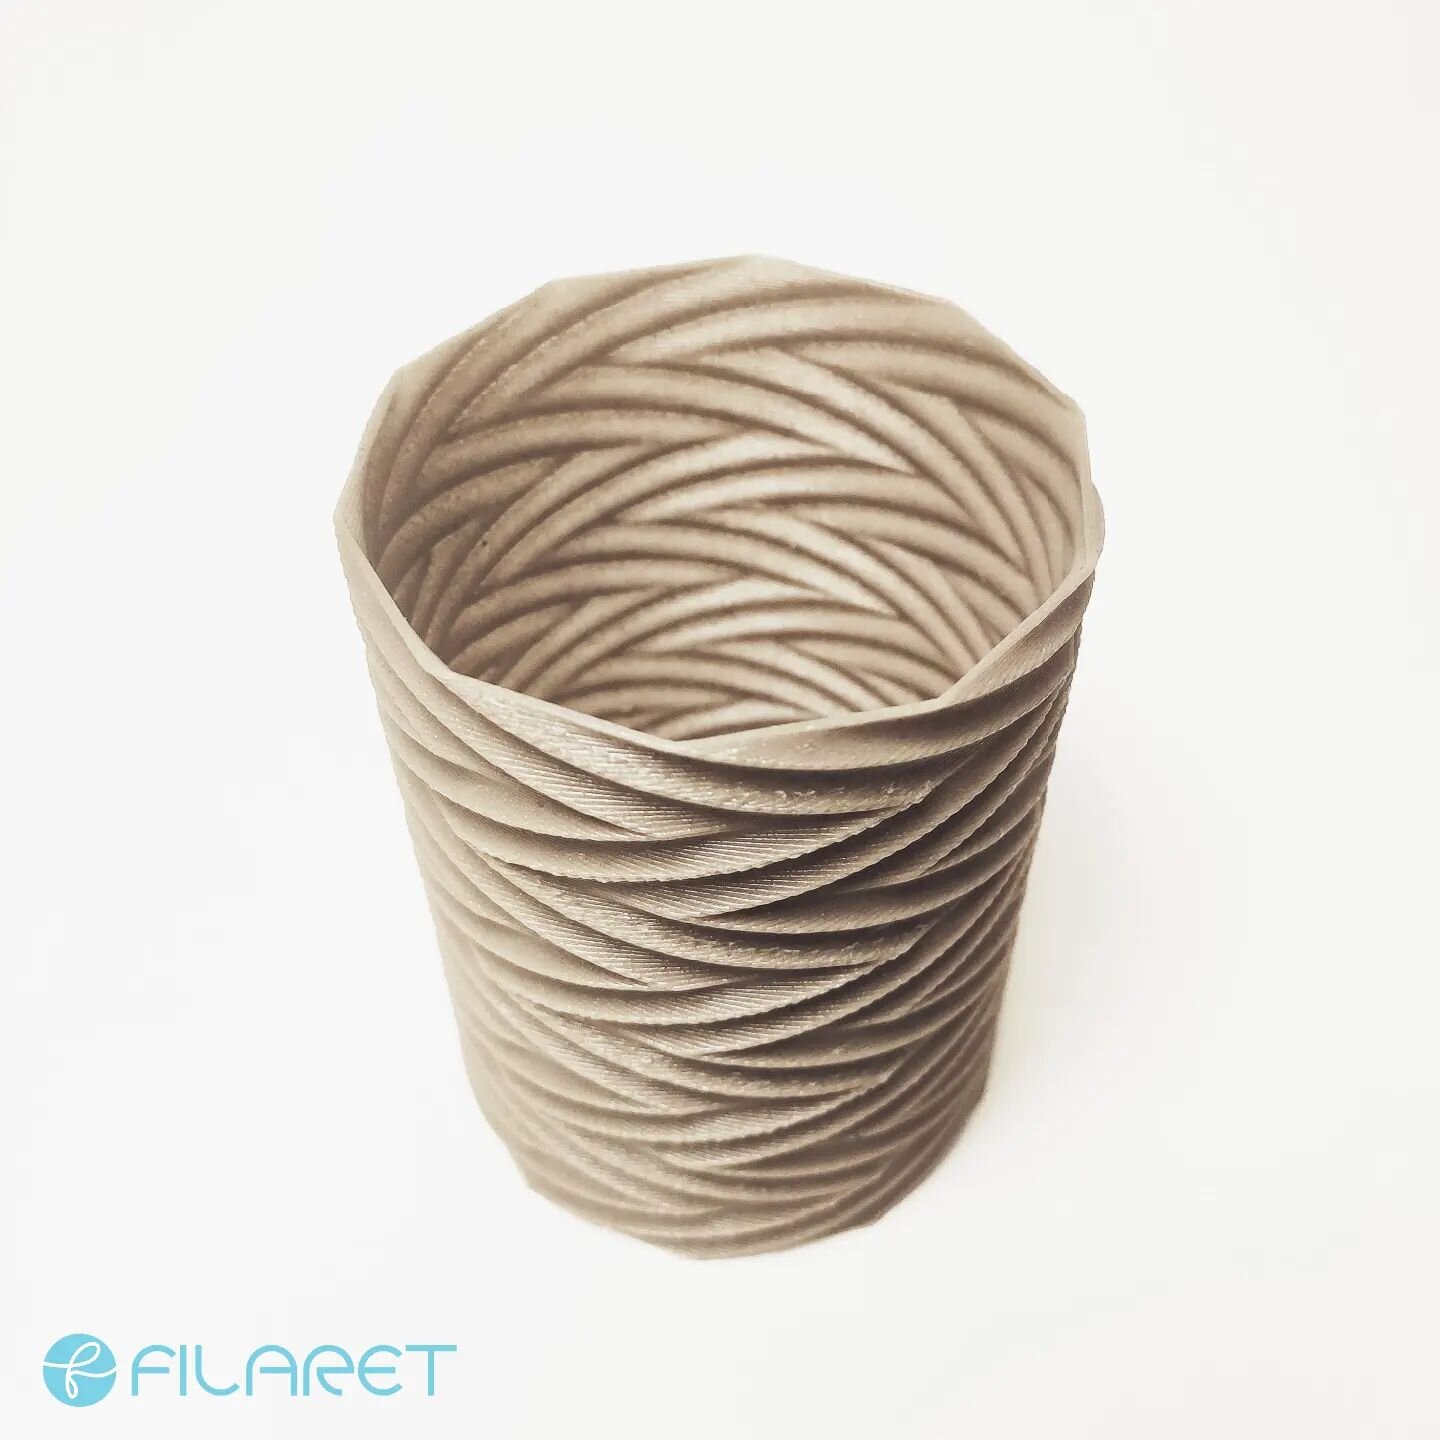 Cup made of butts? 😳

Another beautiful example 3D printed from upcycled cigarette butt waste! ♻️ 🚬

Reducing waste, biodegradable and guilt free! 💚

#Filaret #upcycling #waste #cigarette #butt